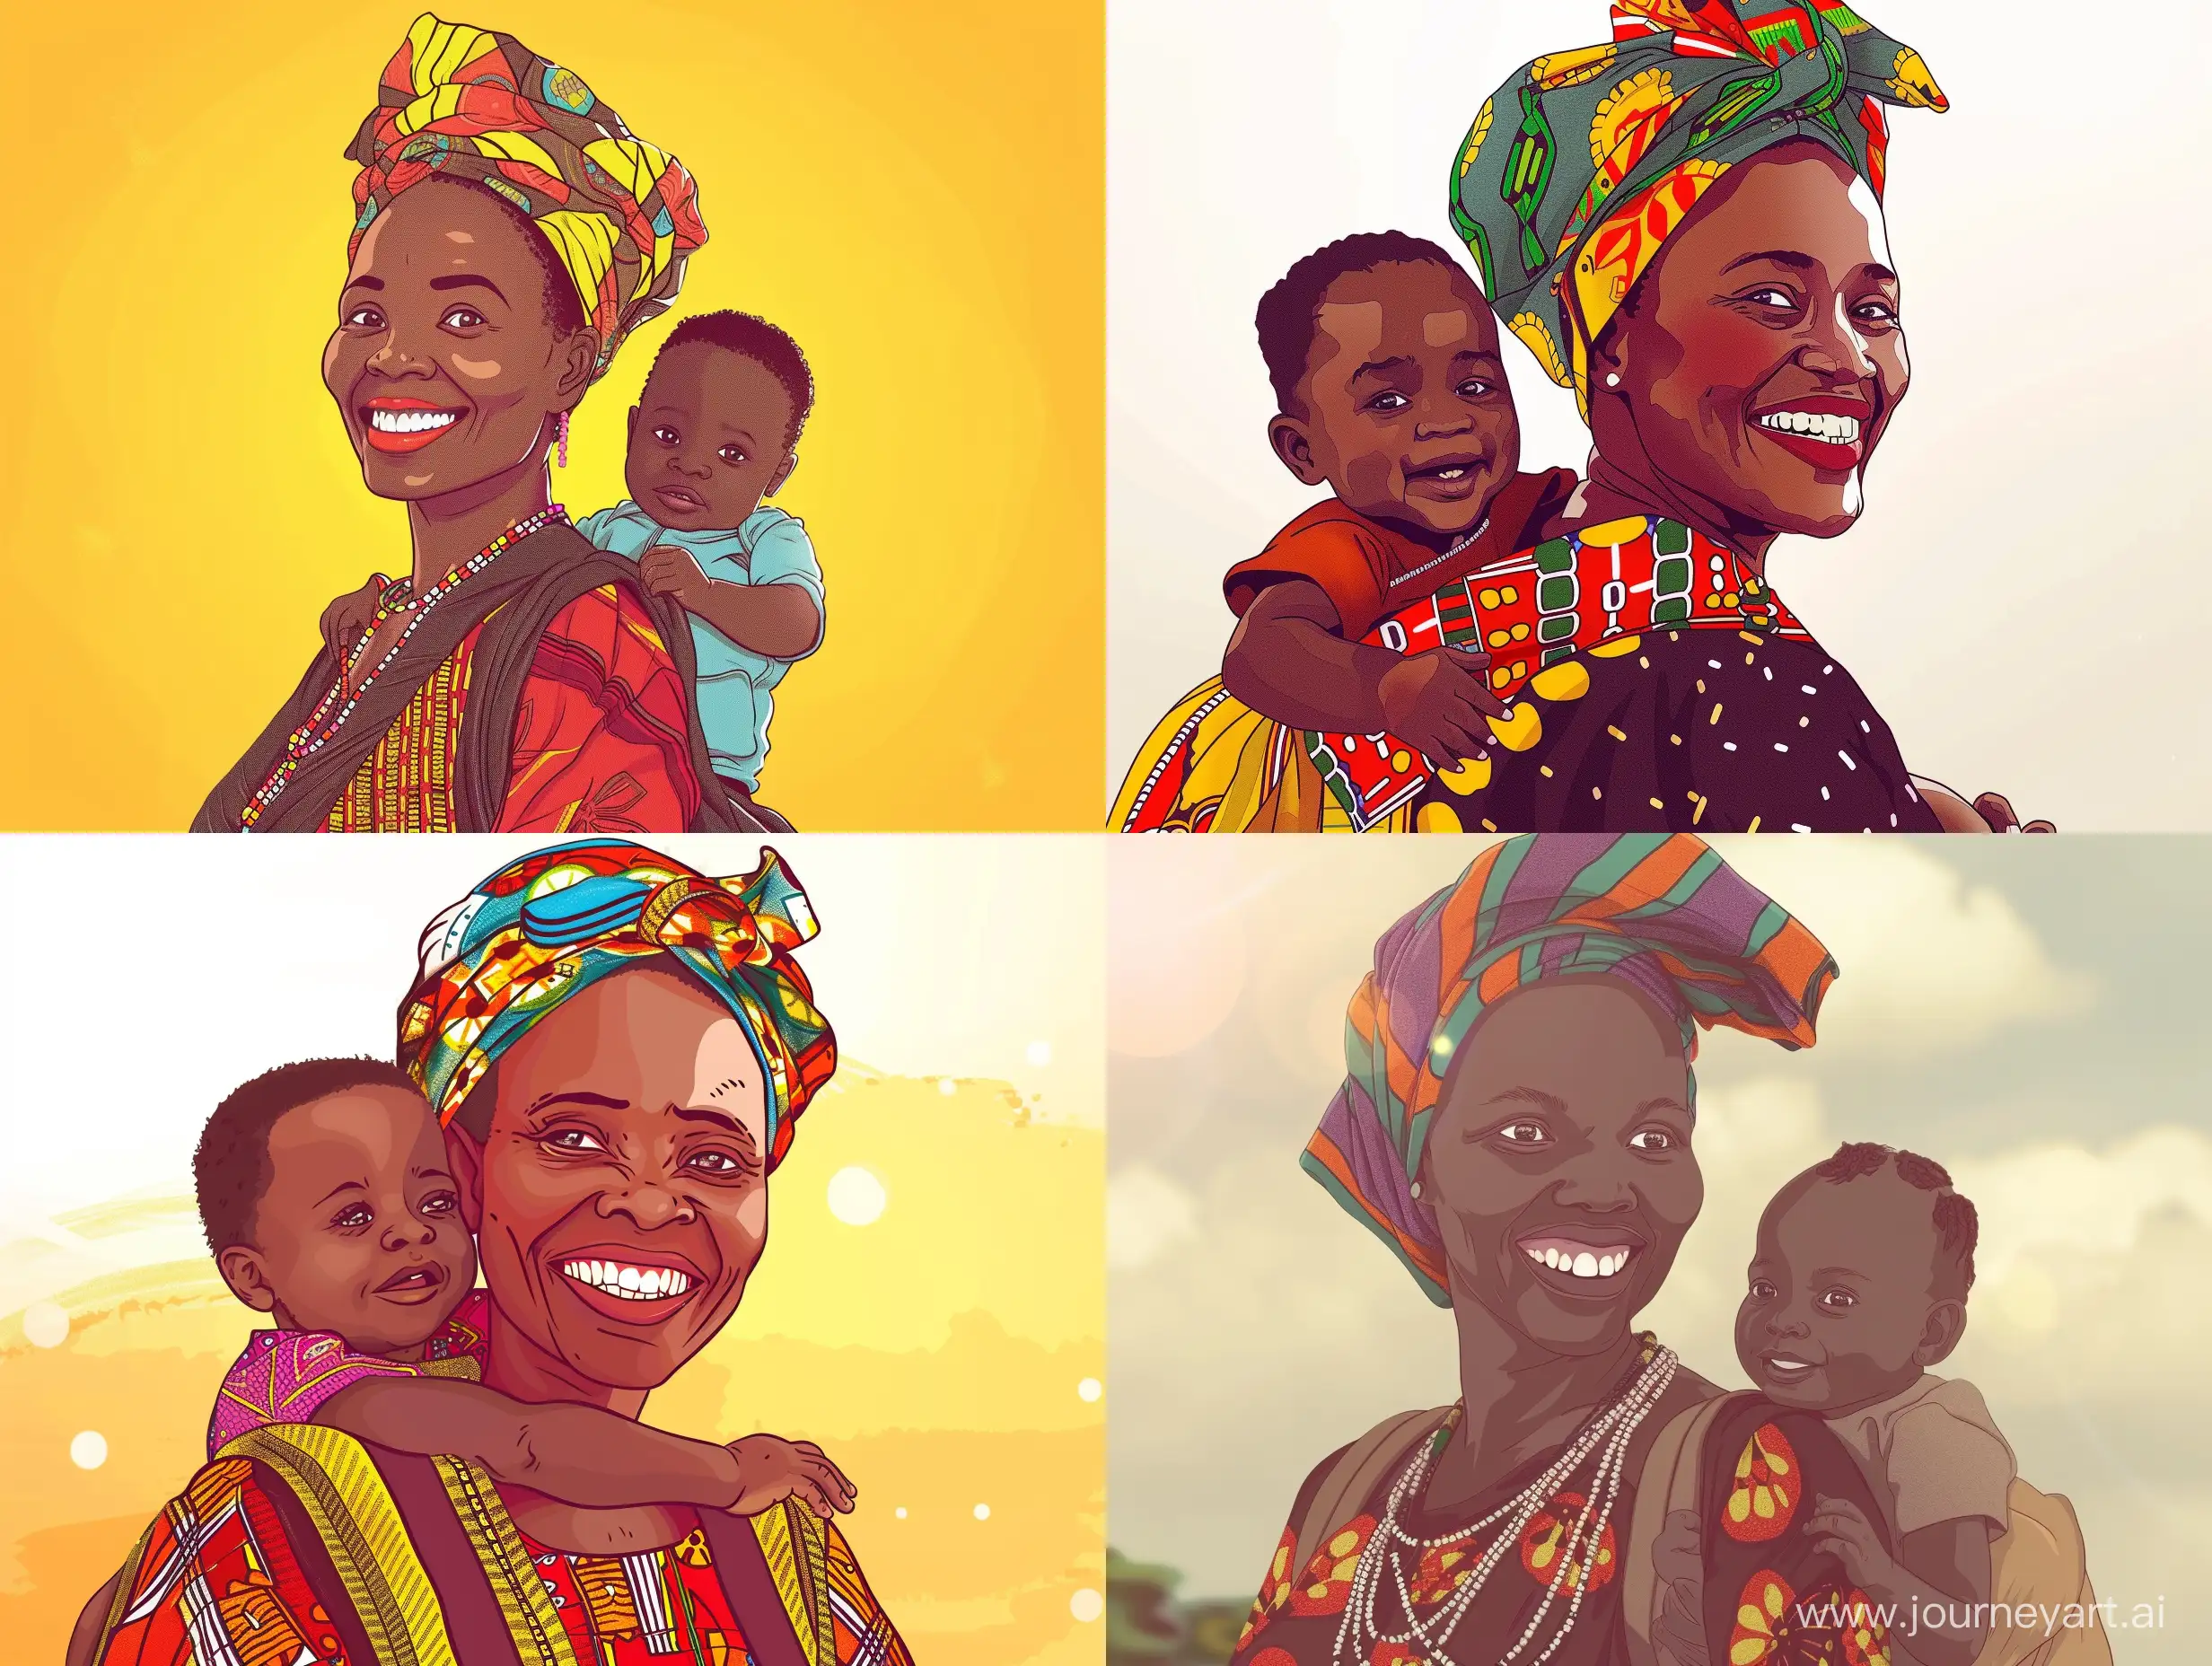 Generate an image of Mama Tekat, a warm-hearted woman with a bright smile, wearing traditional Ugandan clothing and a colorful headwrap, while holding baby Tino on her back. As African anime cartoon